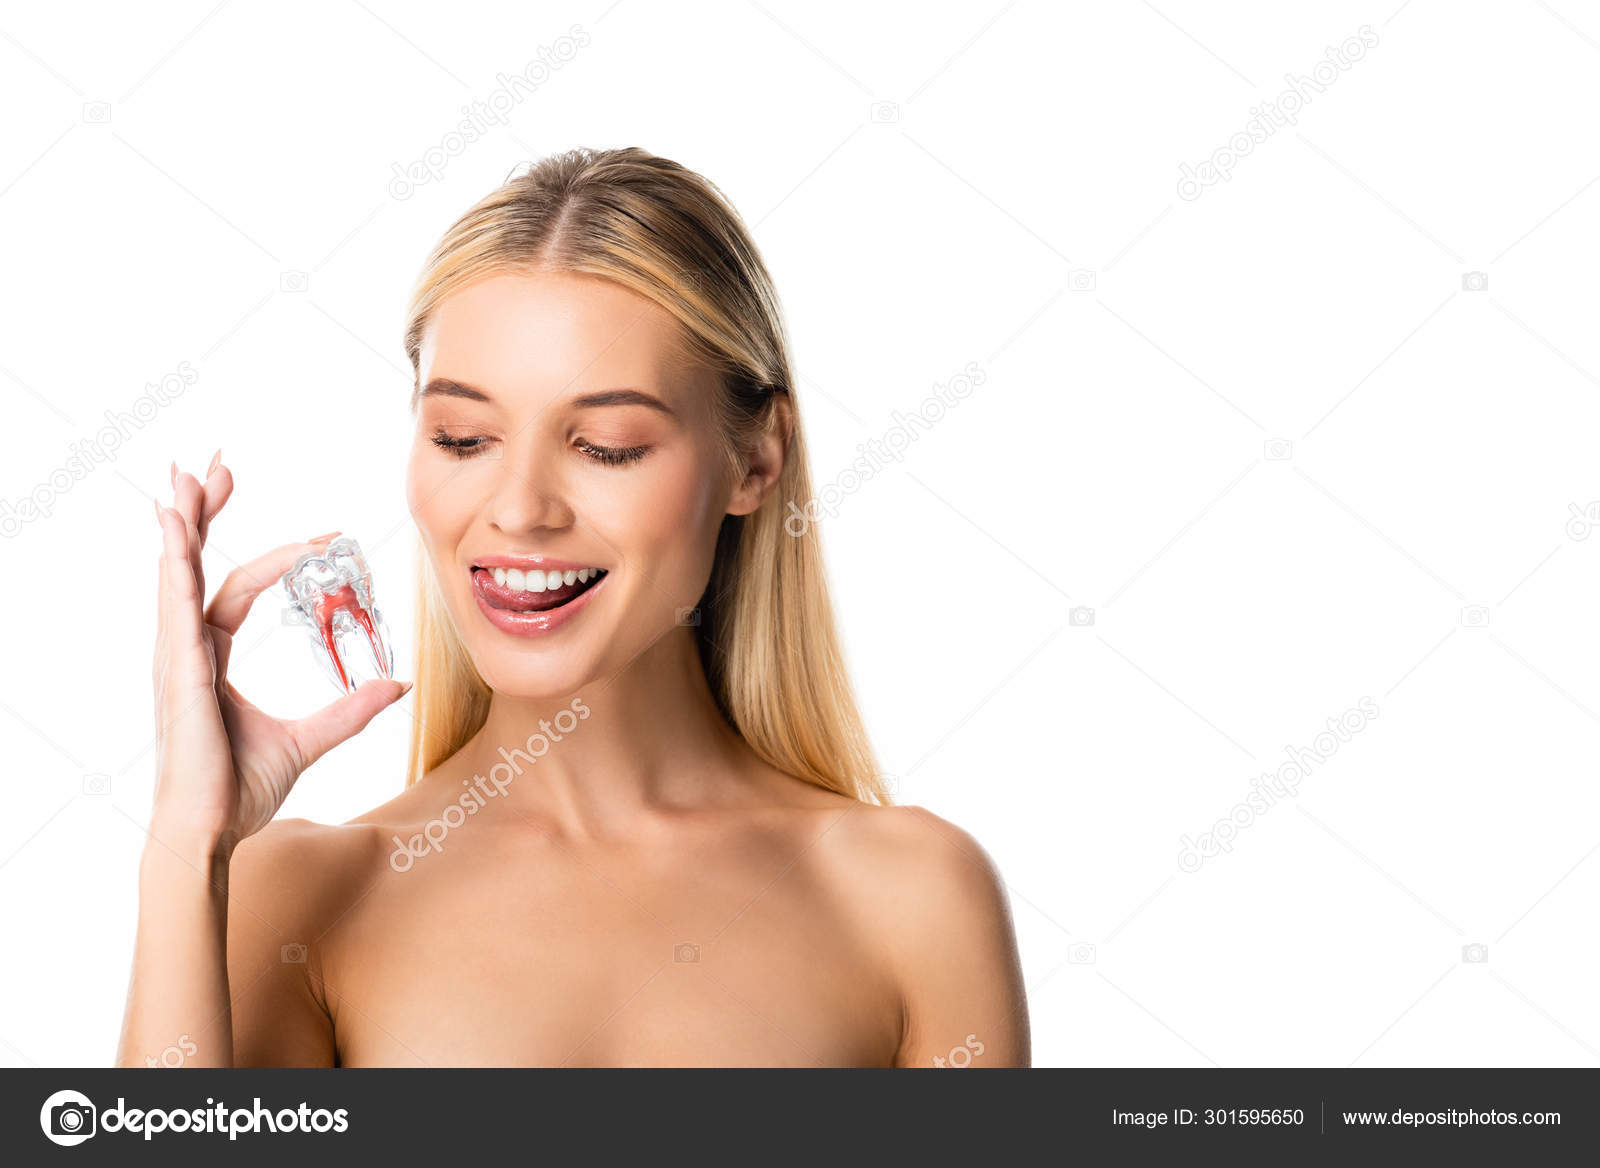 Naked Smiling Woman White Teeth Looking Tooth Model Isolated White